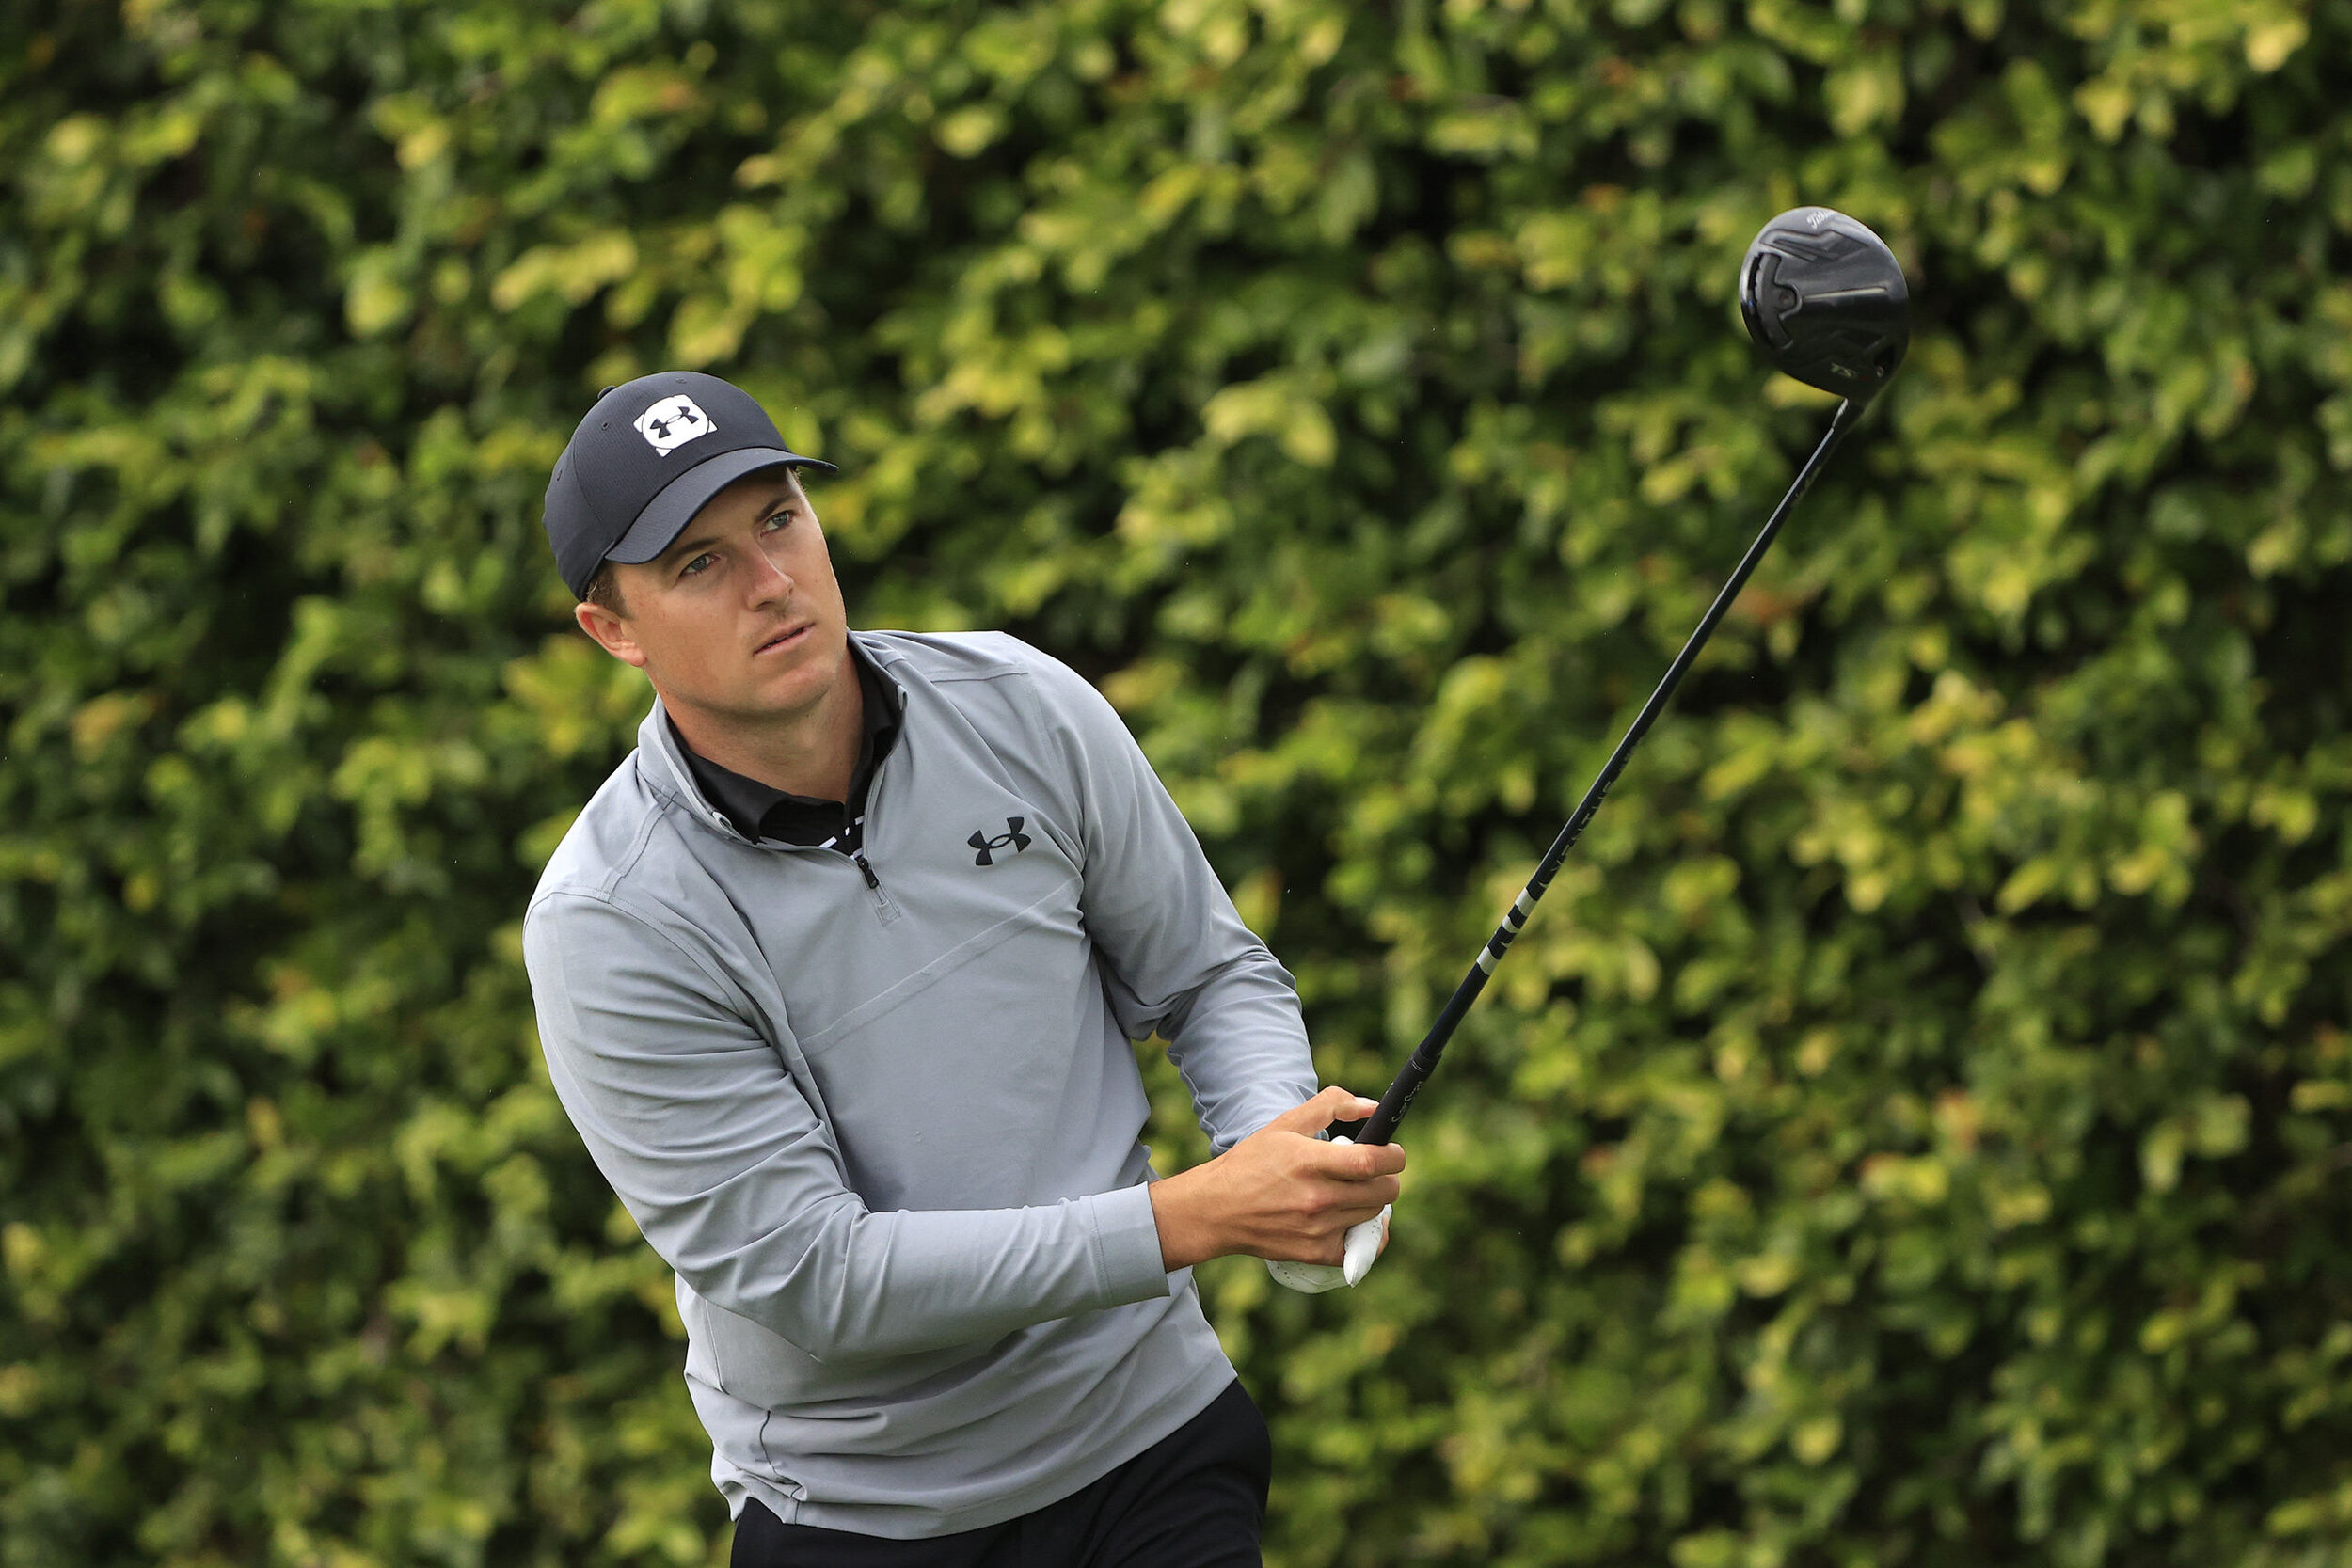  ORLANDO, FLORIDA - MARCH 06: Jordan Spieth of the United States watches his tee shot on the ninth hole during the third round of the Arnold Palmer Invitational Presented by MasterCard at the Bay Hill Club and Lodge on March 06, 2021 in Orlando, Flor